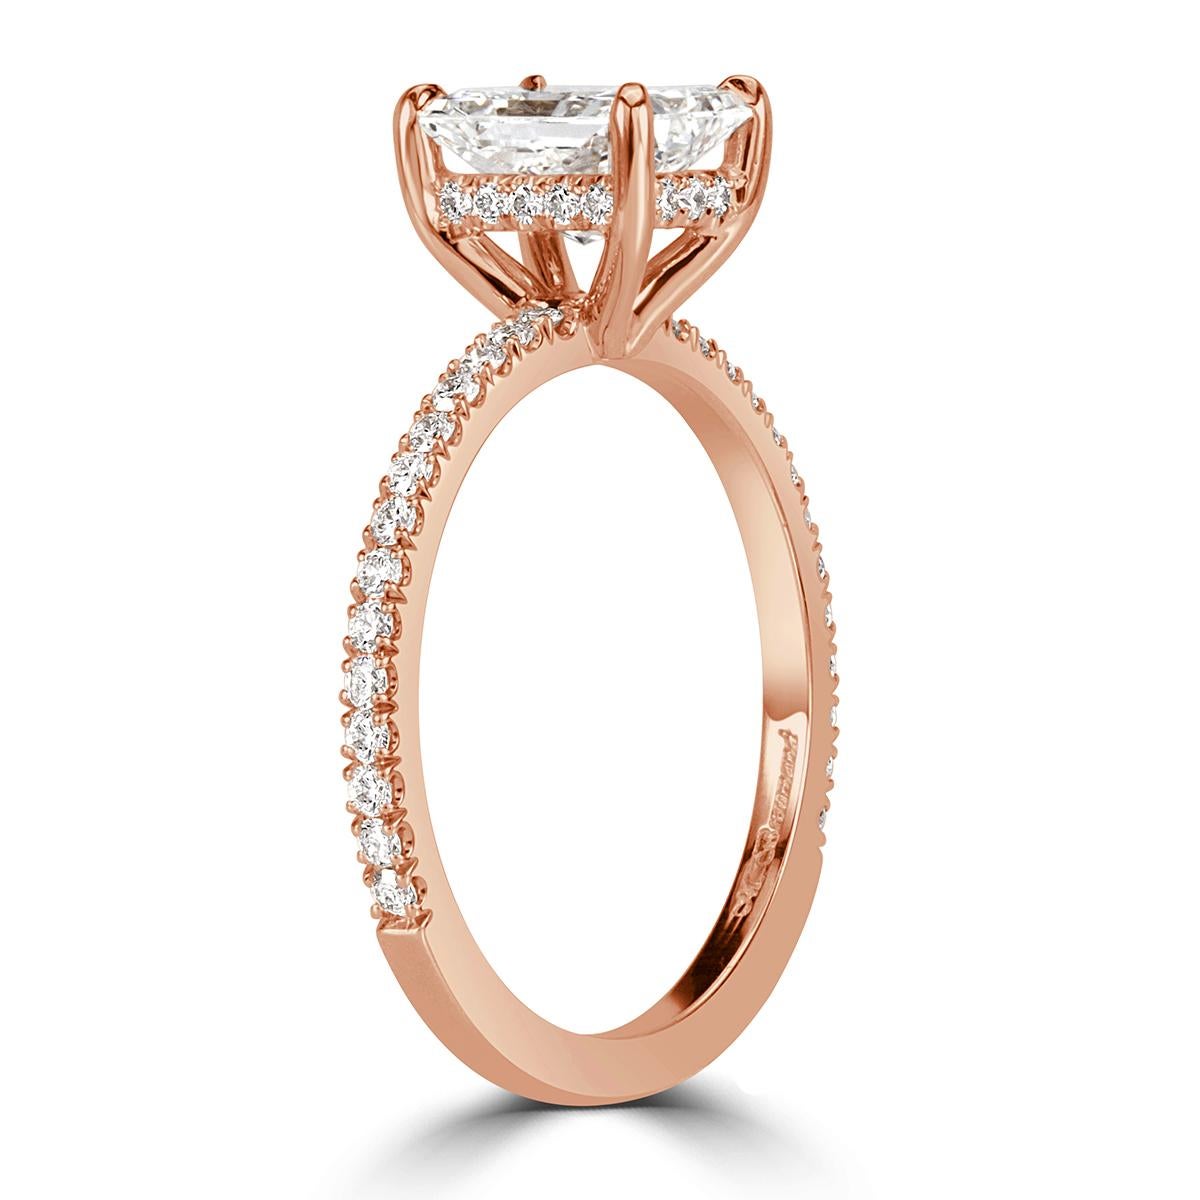 Created in our custom 18k rose gold, this stunning diamond engagement ring showcases a magnificent 1.30ct radiant cut center diamond, GIA certified at I in color, VS2 in clarity. It faces up white in addition of having an excellent cut grade in both